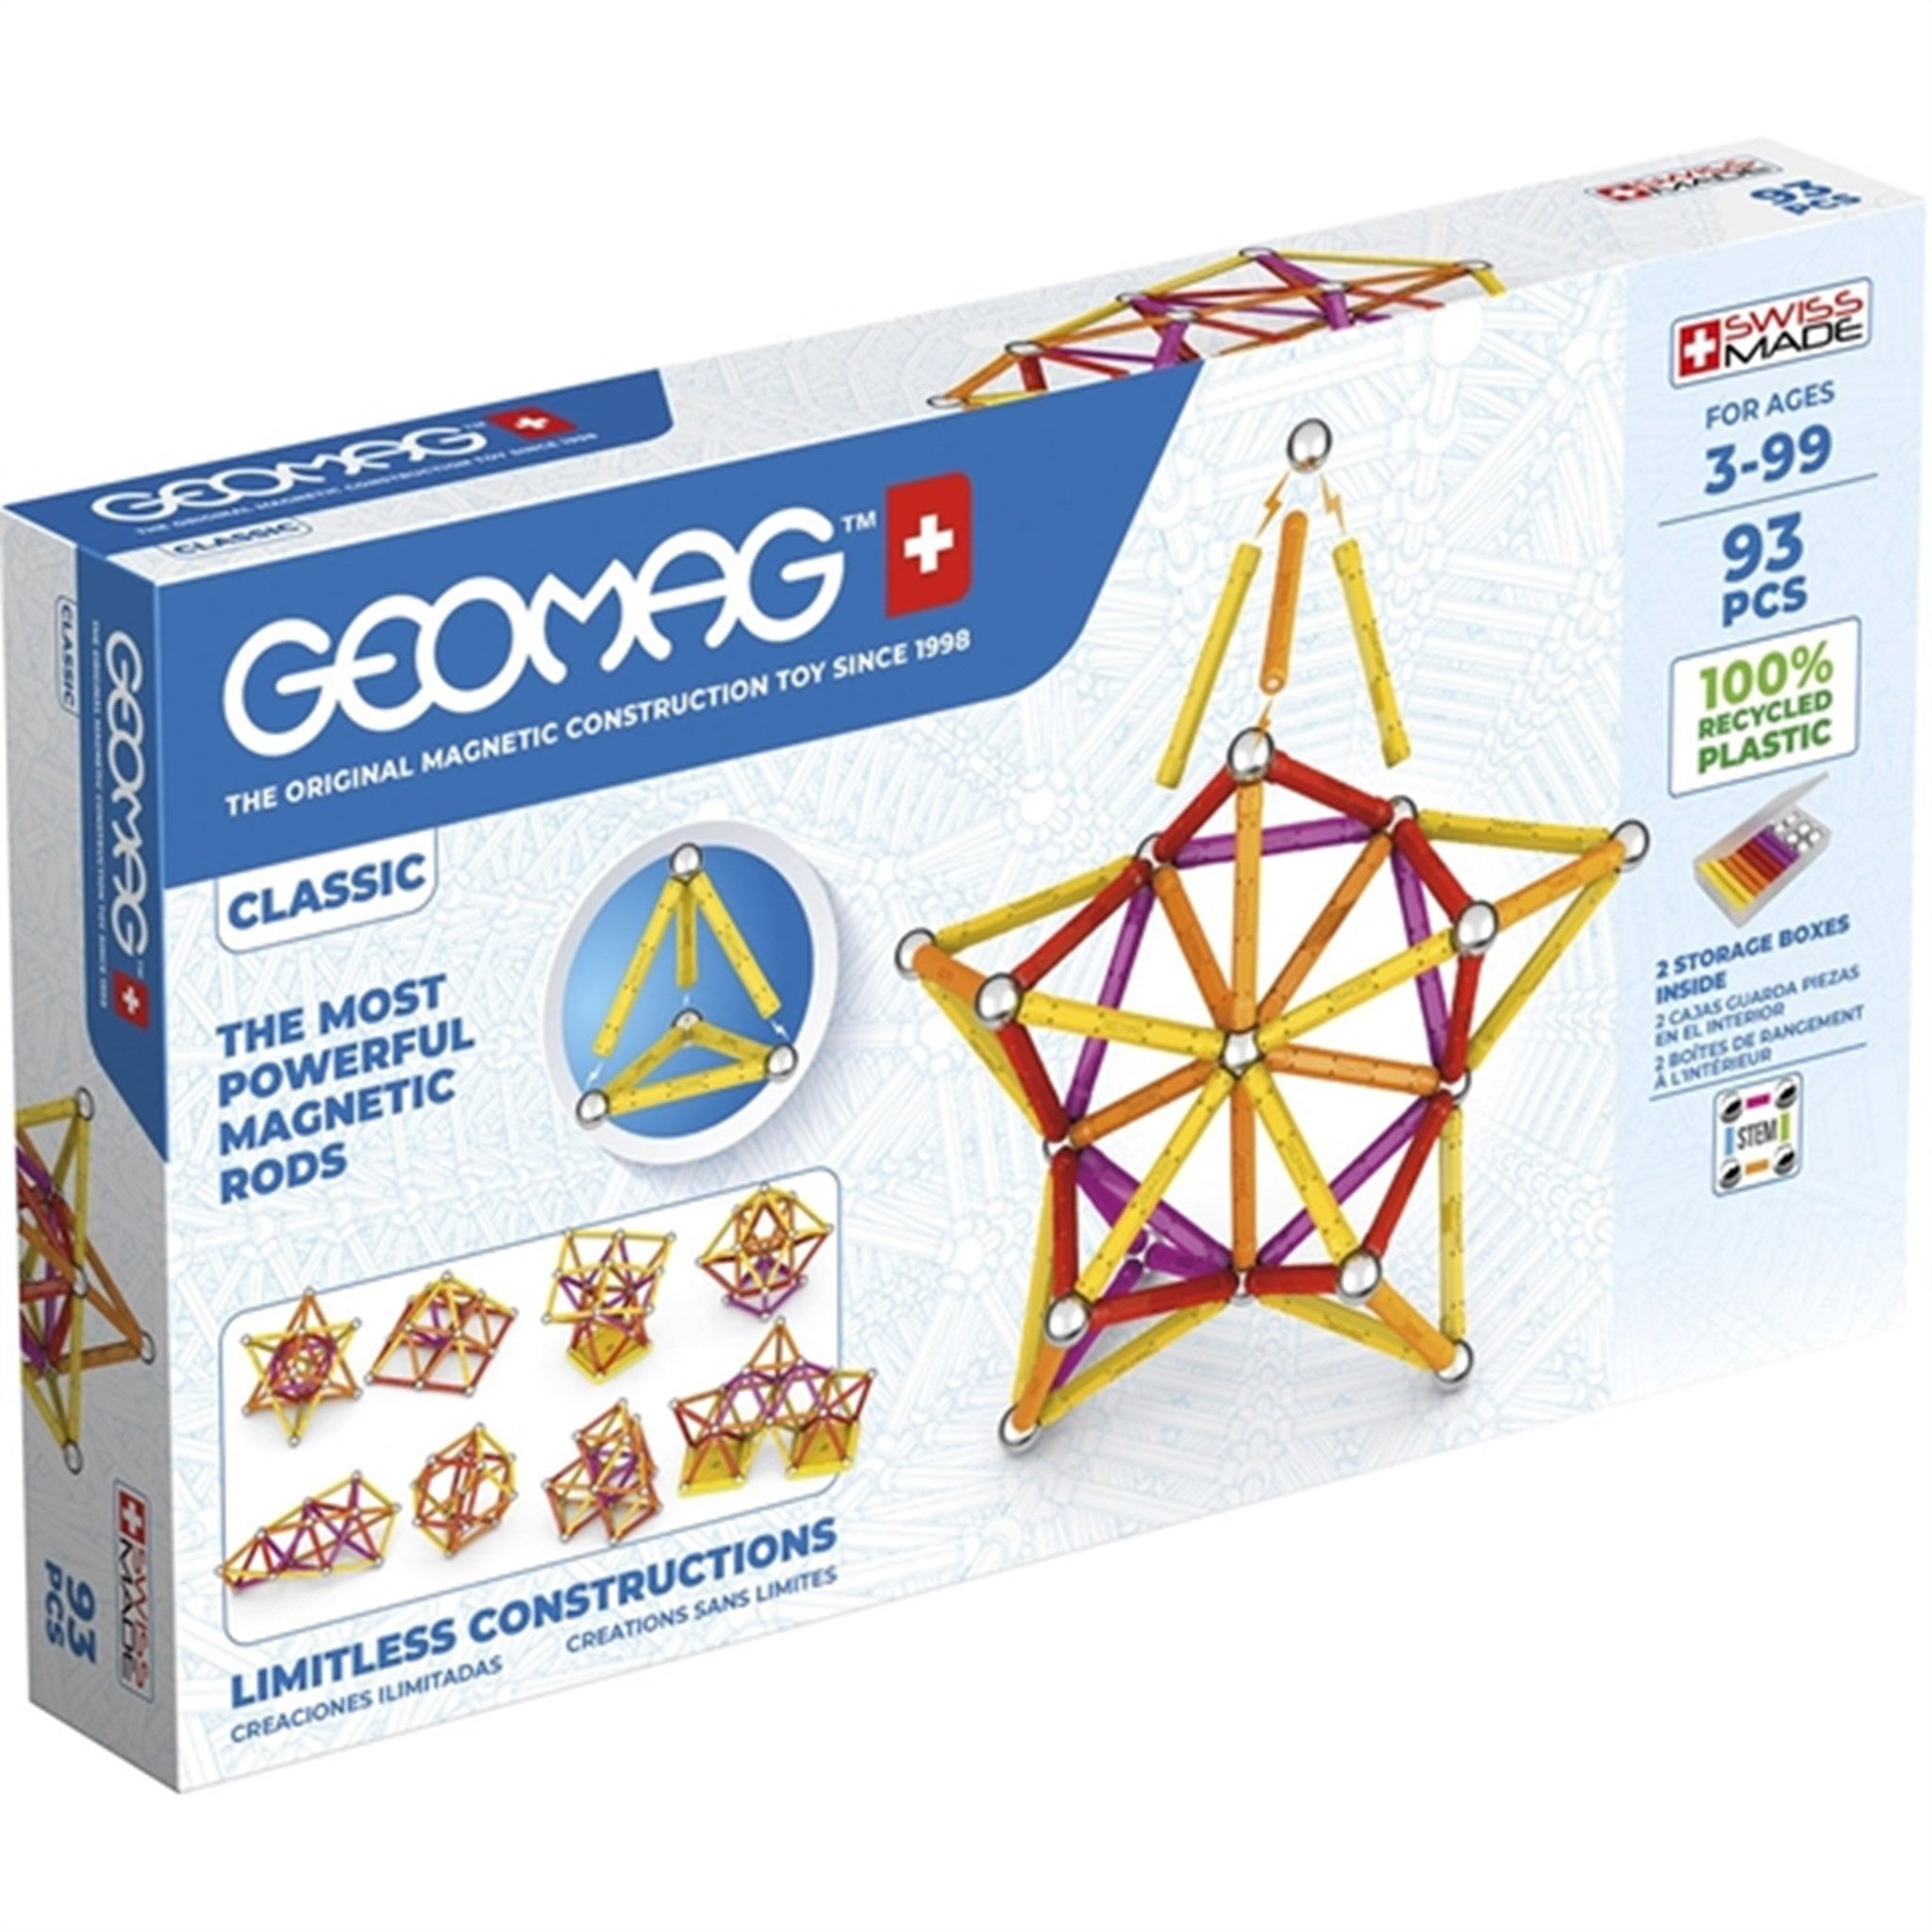 Geomag Classic Recycled 93 pcs